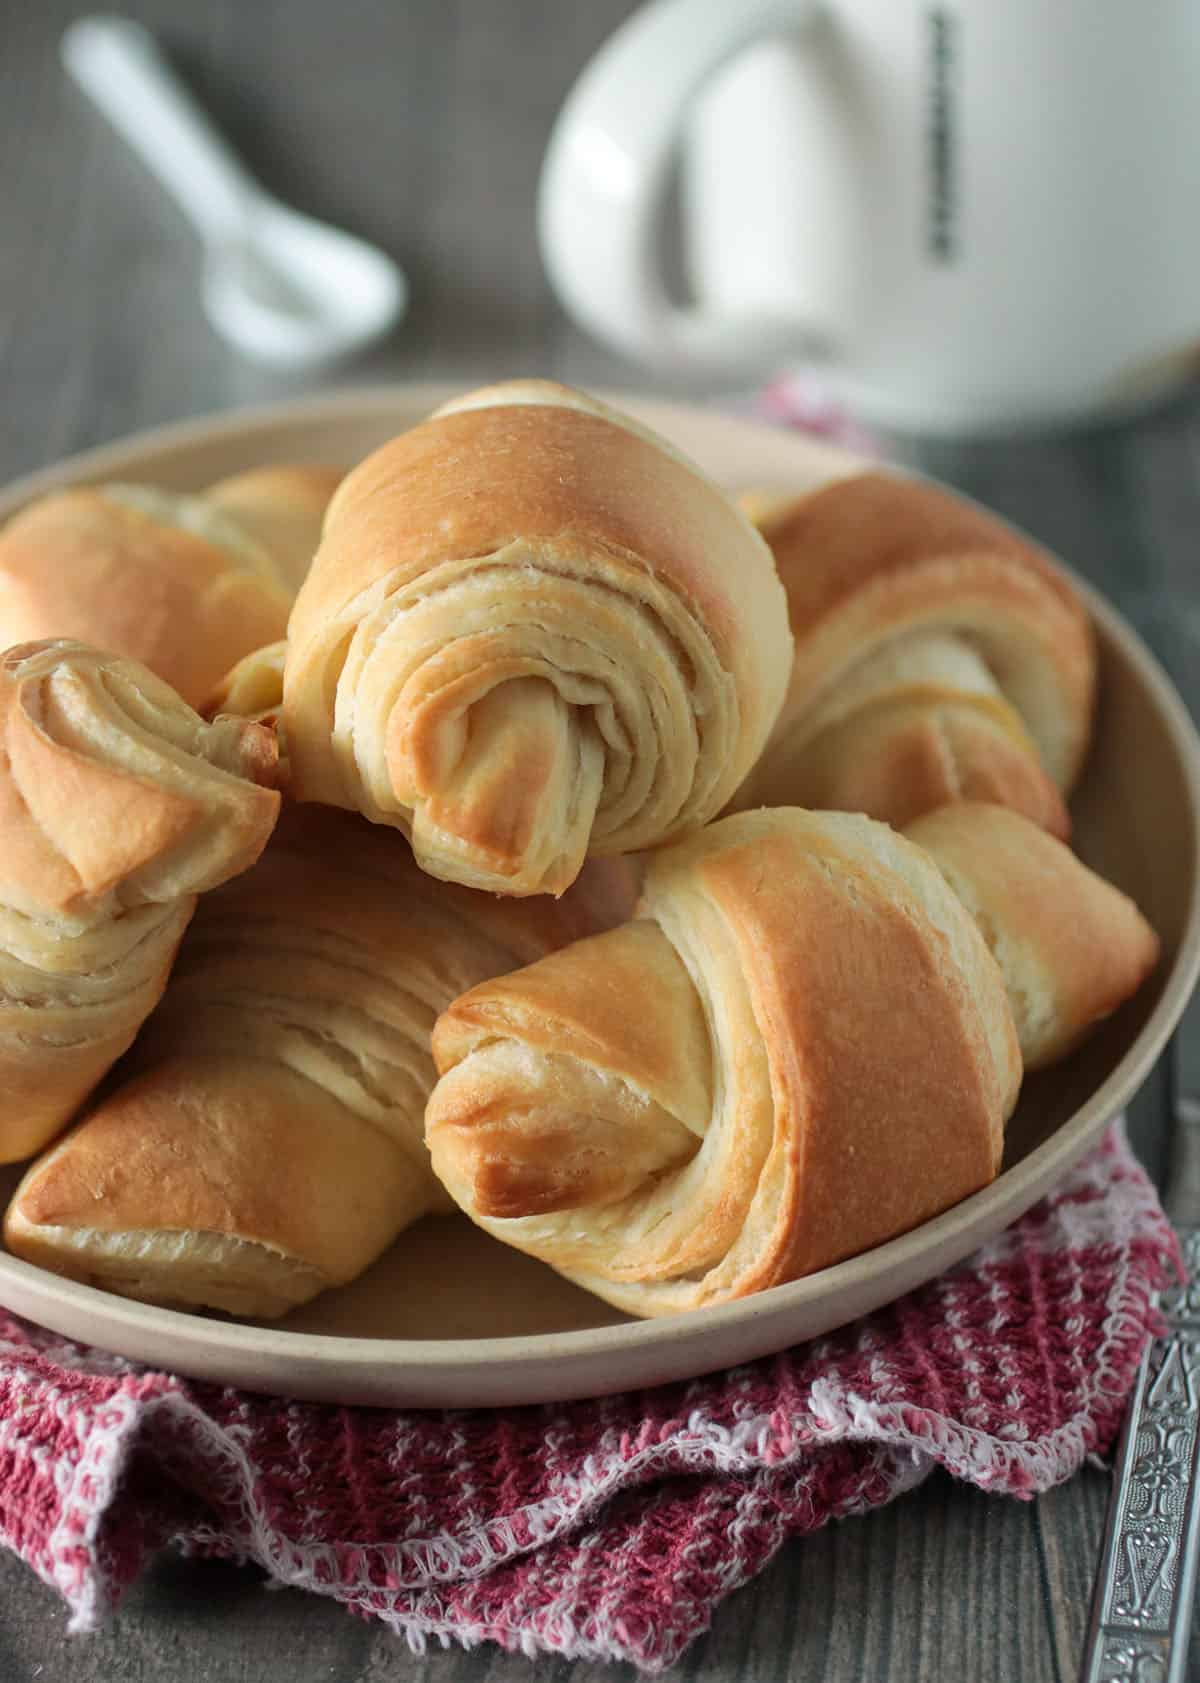 Crescent rolls on a plate.